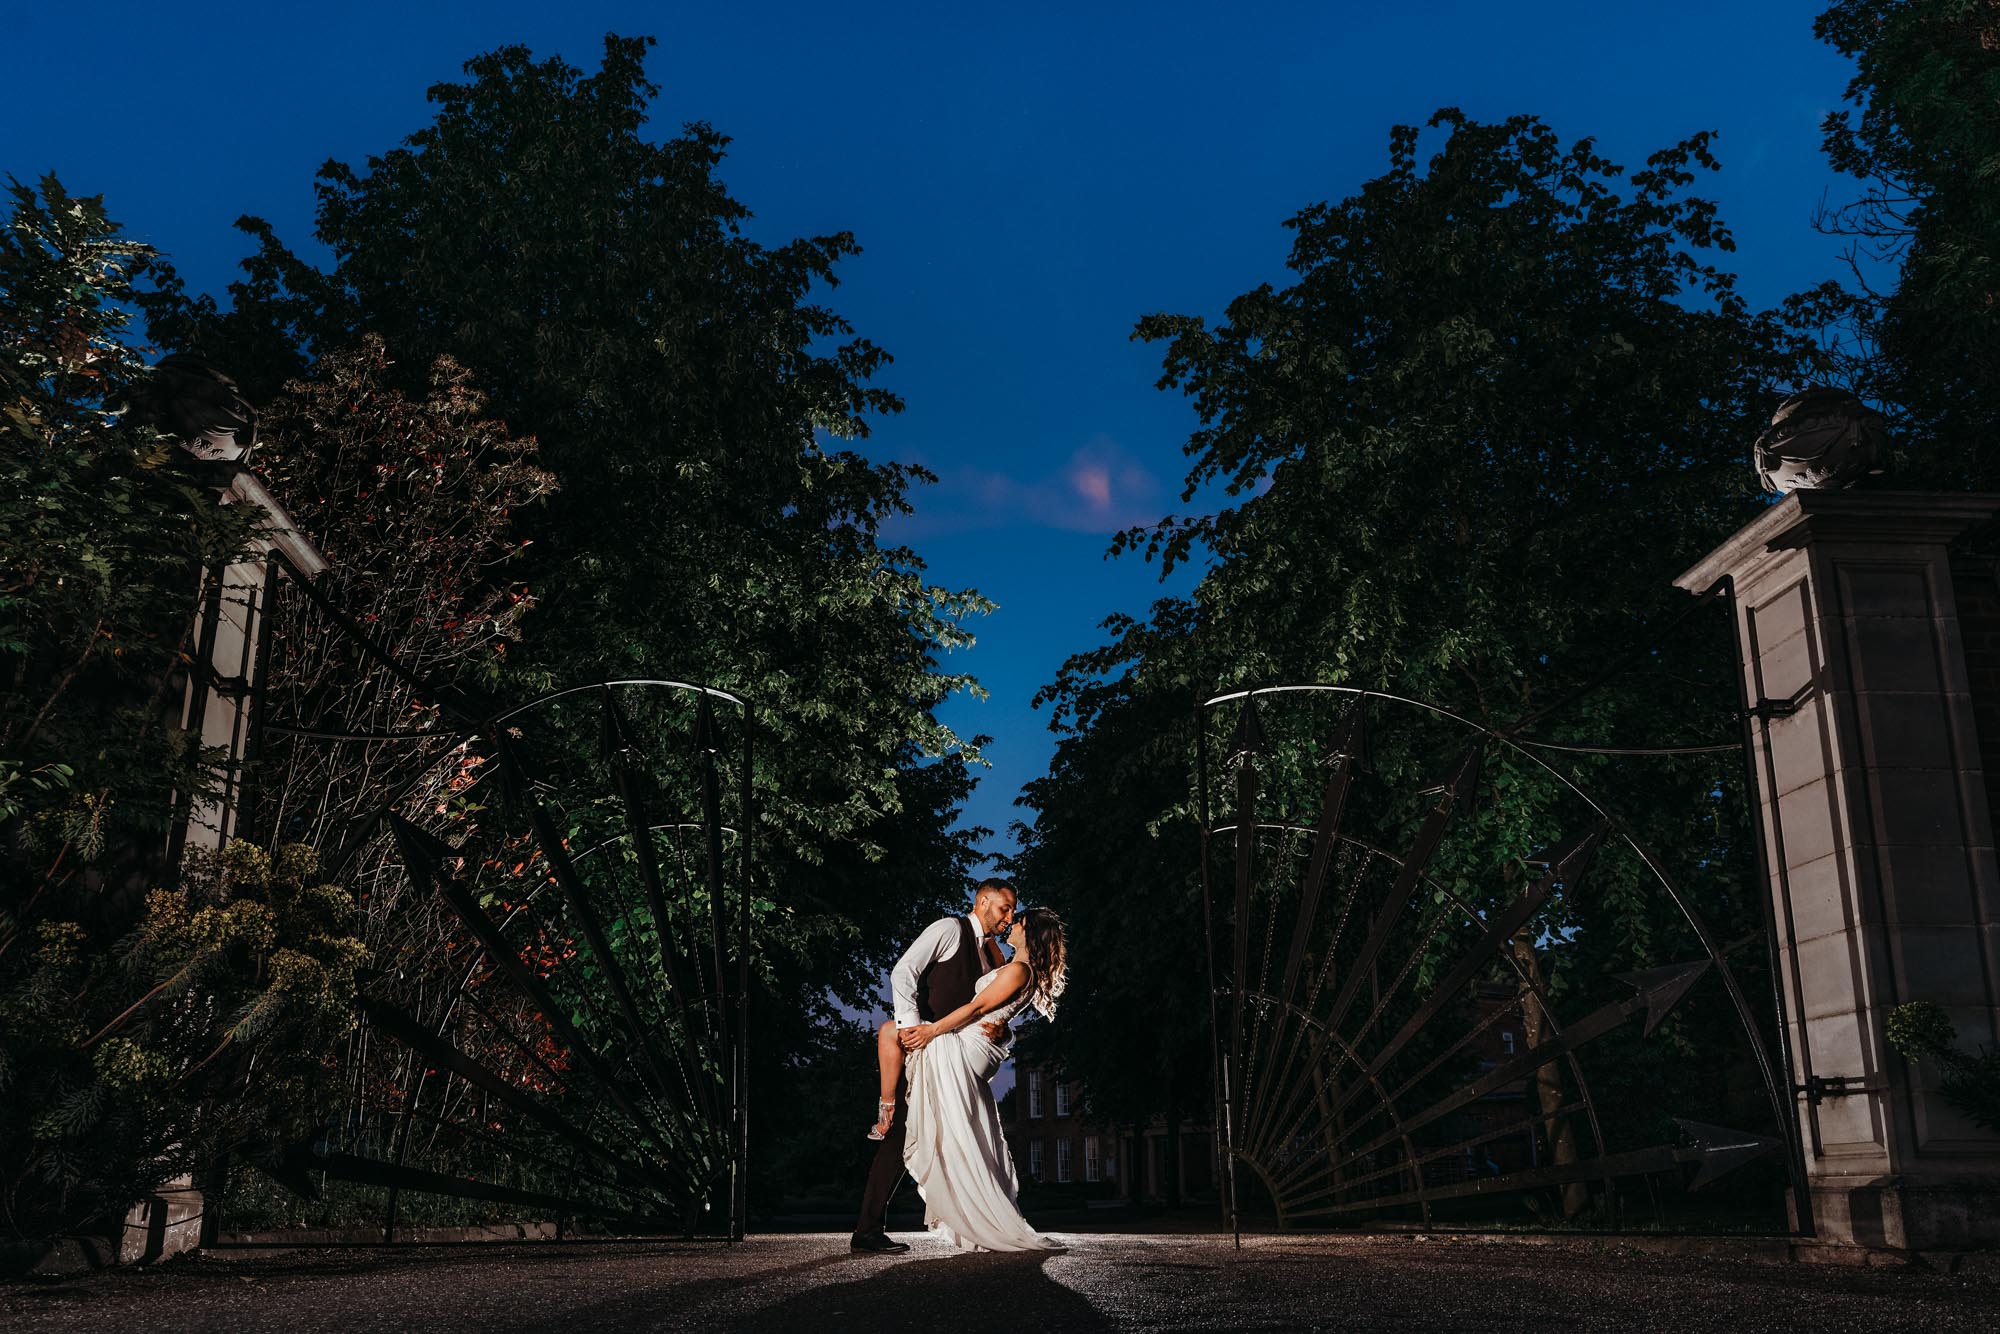 Wedding photograph of groom dipping the bride at the front gates outside Colwick Hall in Nottingham. Beautifully lit with a flash at the front so the sky is blue and the hall behind them.